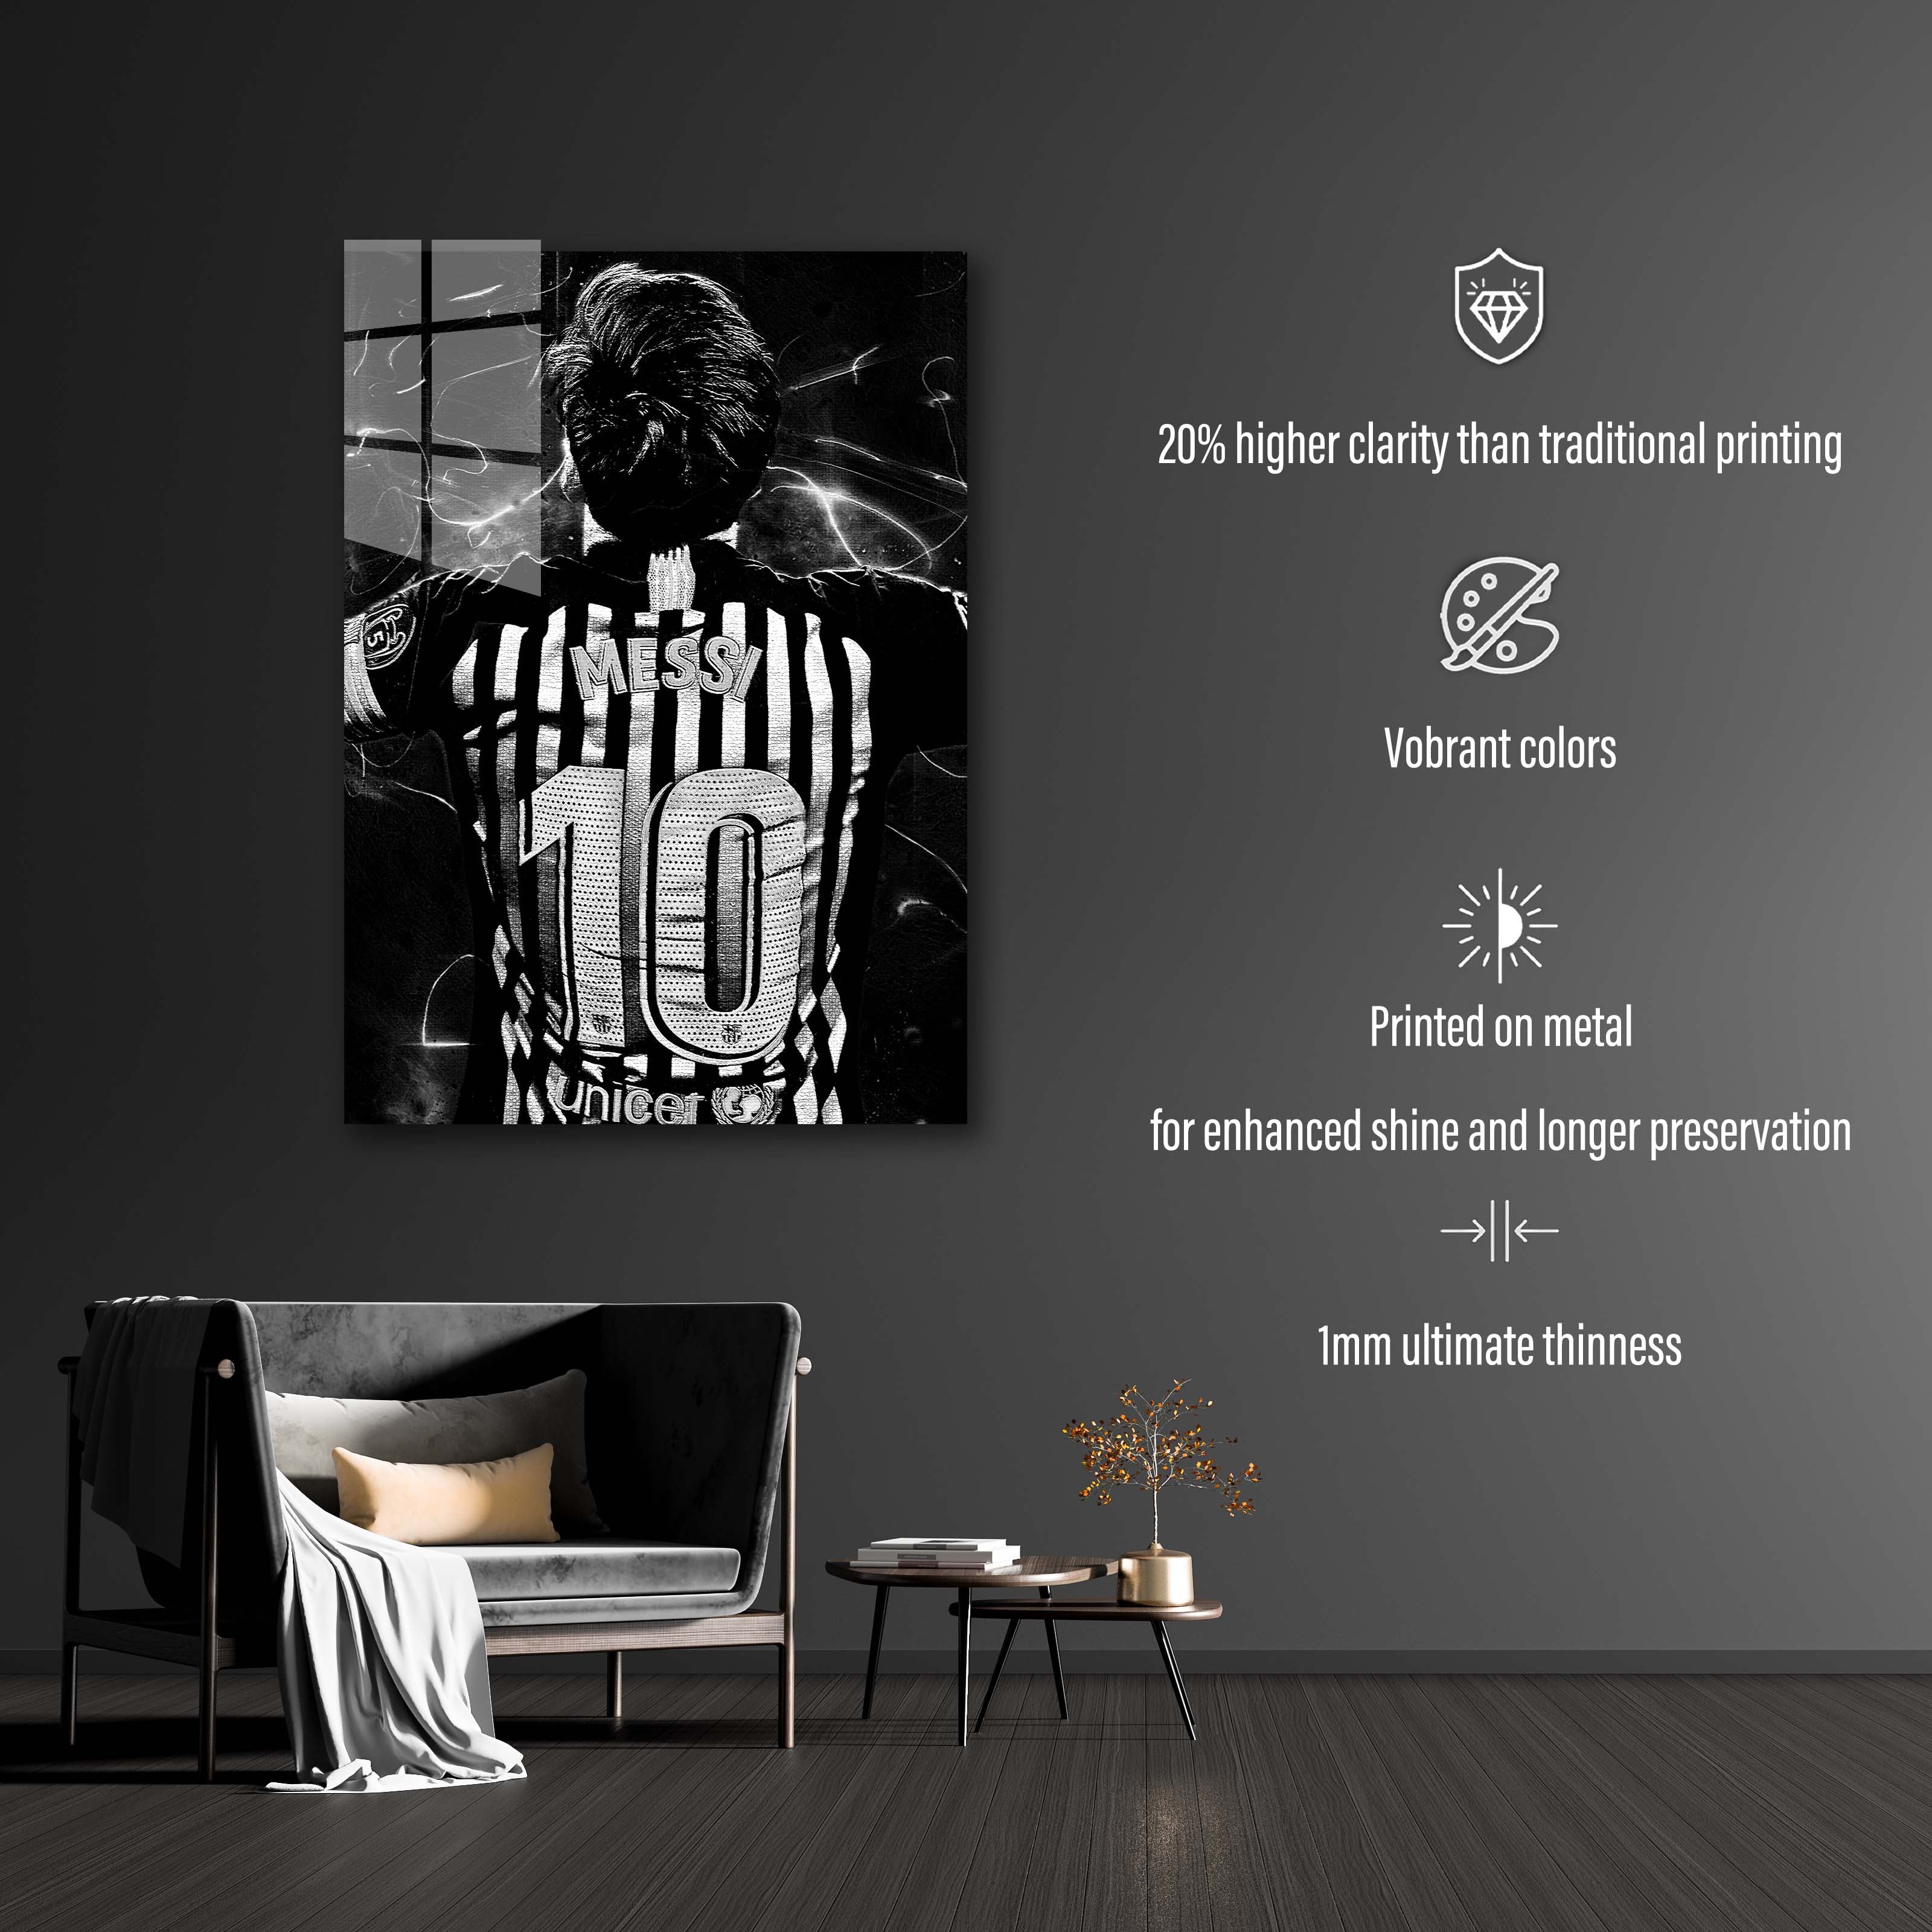 Messi Black and white-designed by @ReskLucky